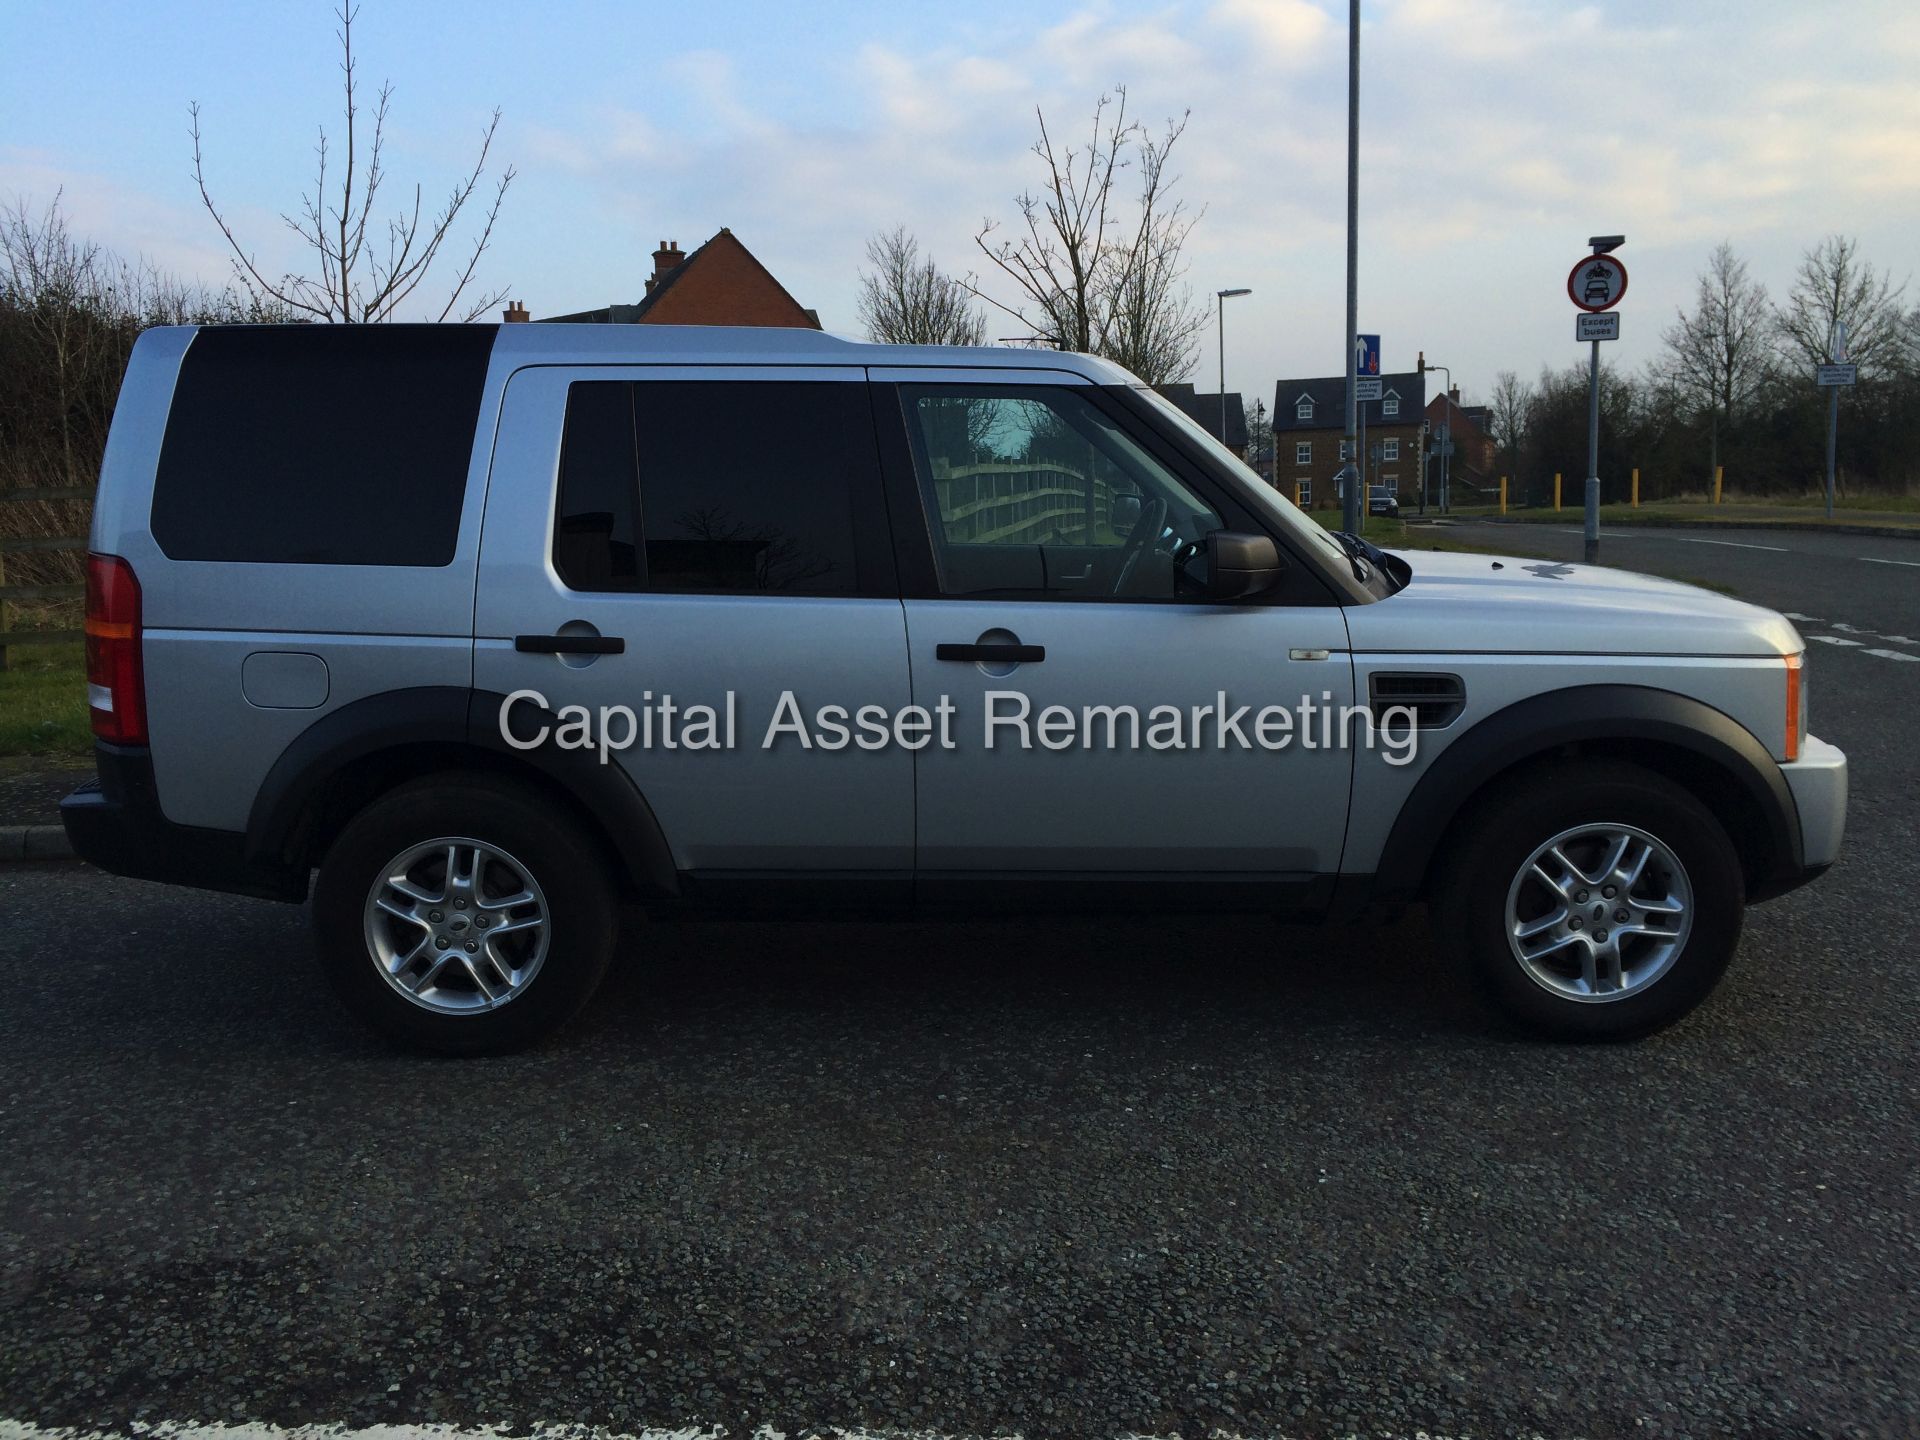 LANDROVER DISCOVERY 3 "TDV6" AUTOMATIC - 1 PREVIOUS OWNER FROM NEW - AIR SUSPENSION - PRIVACY GLASS! - Image 6 of 18